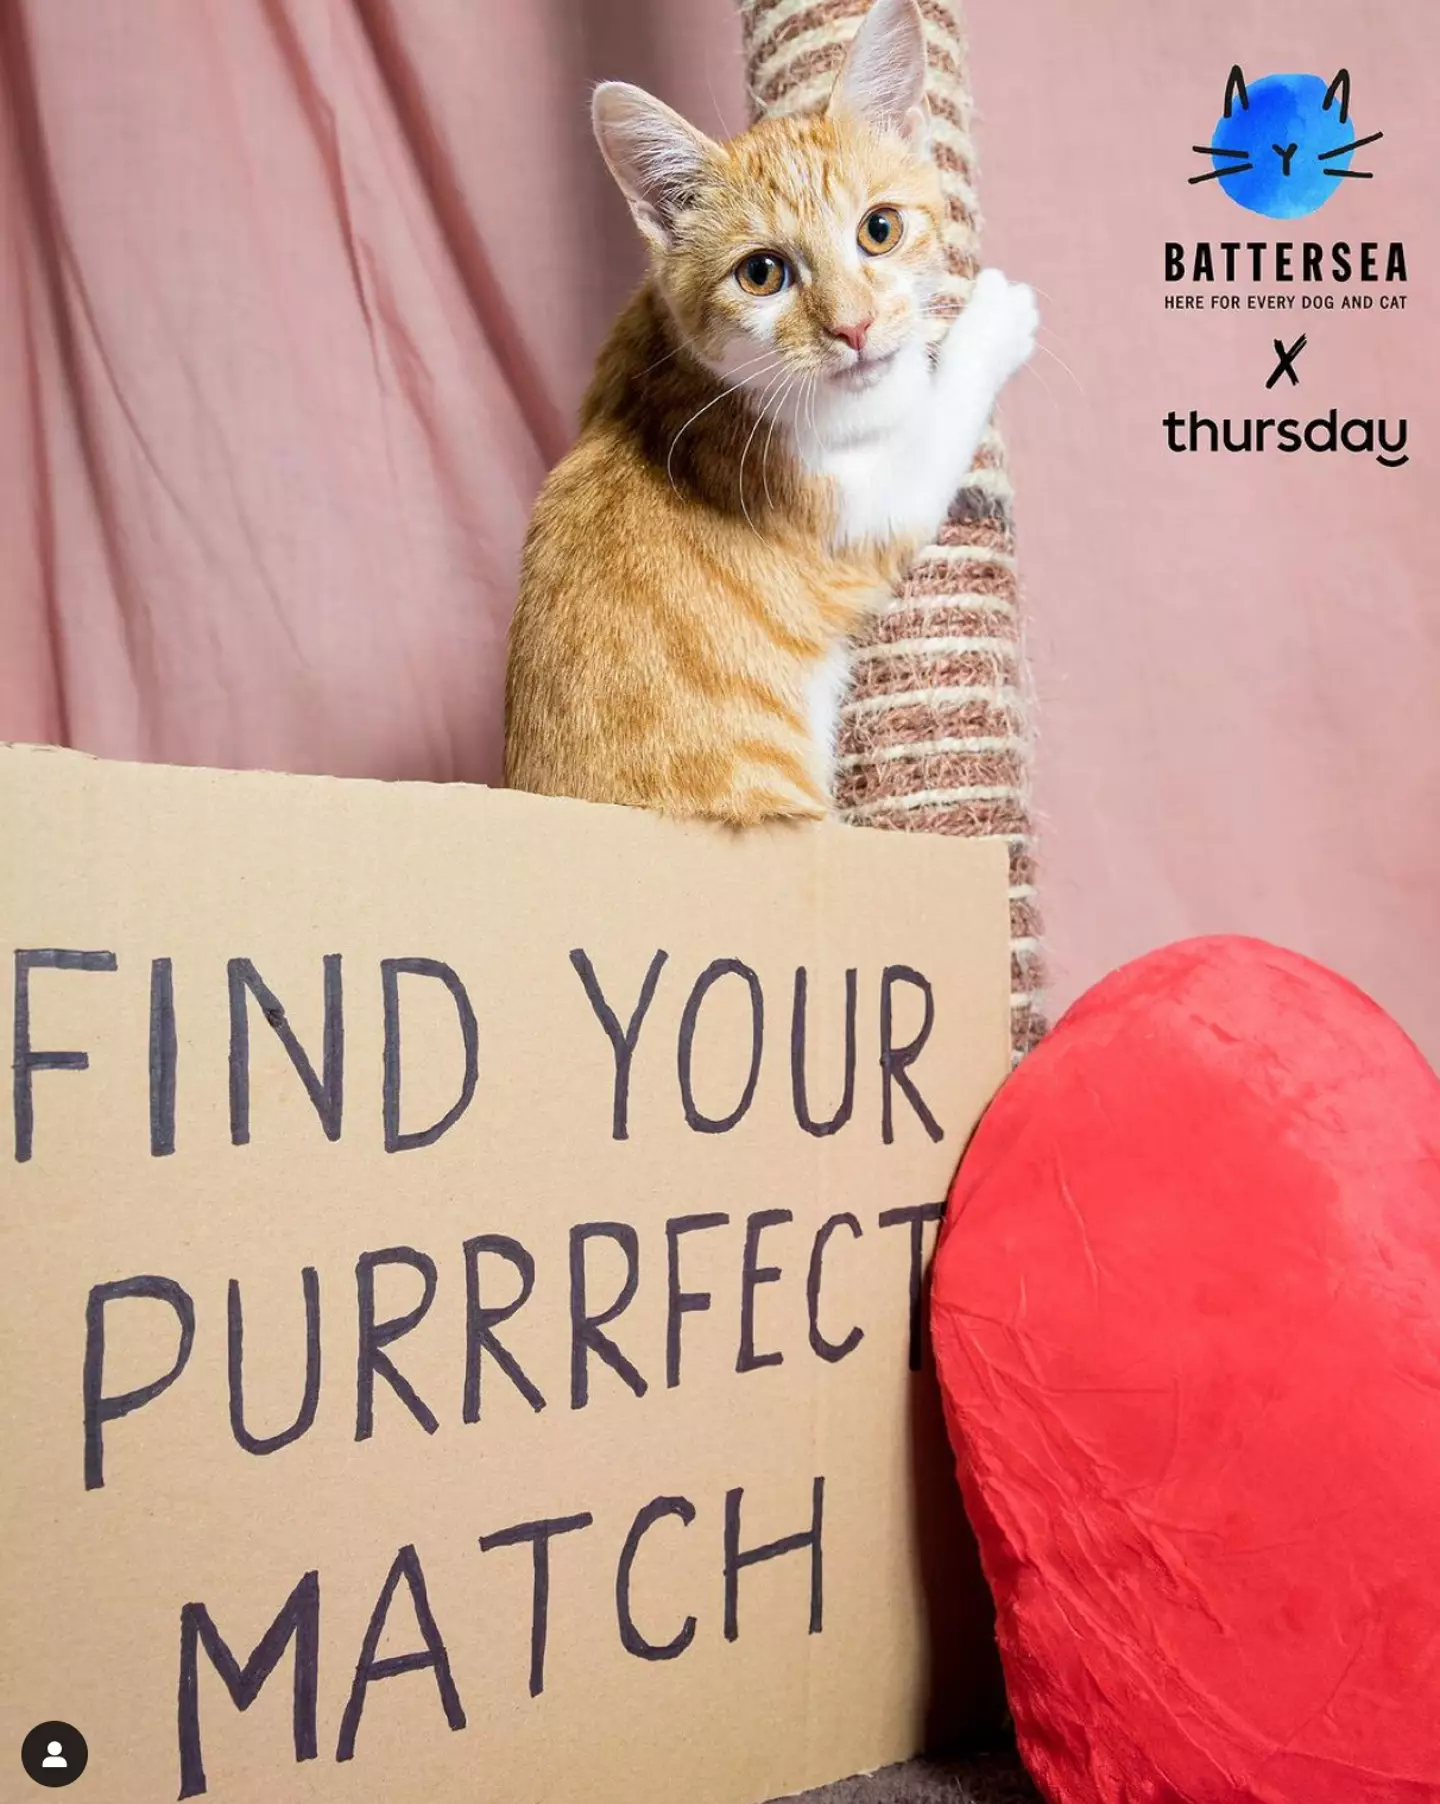 Battersea and Thursday have coupled up for a new event.